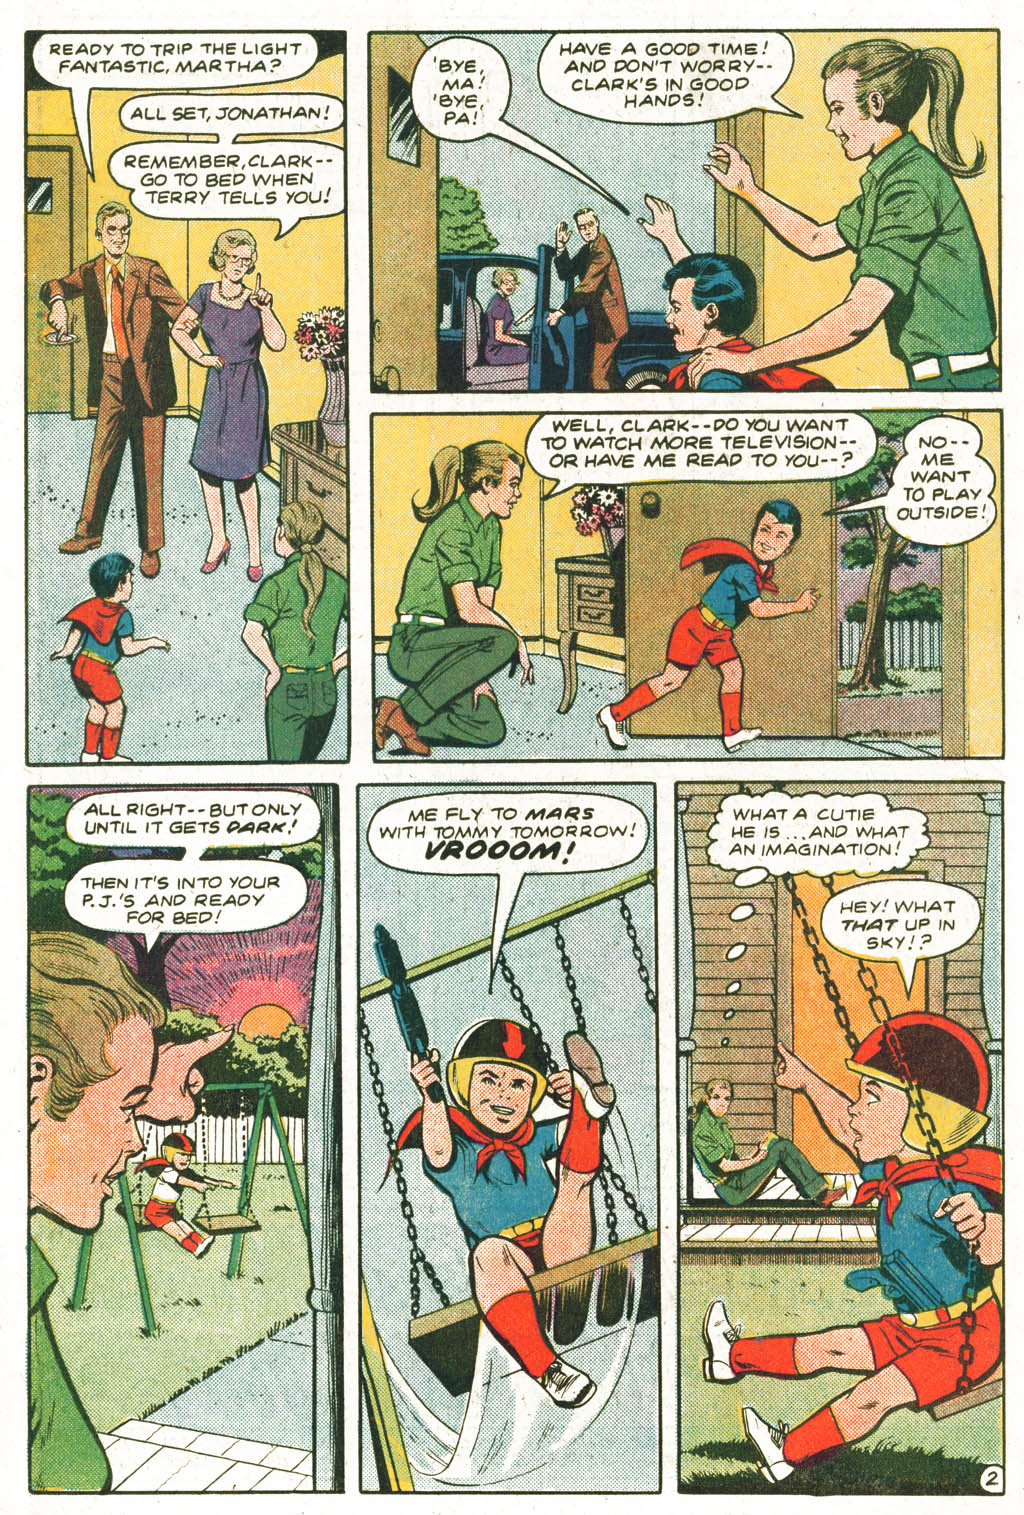 The New Adventures of Superboy 24 Page 21